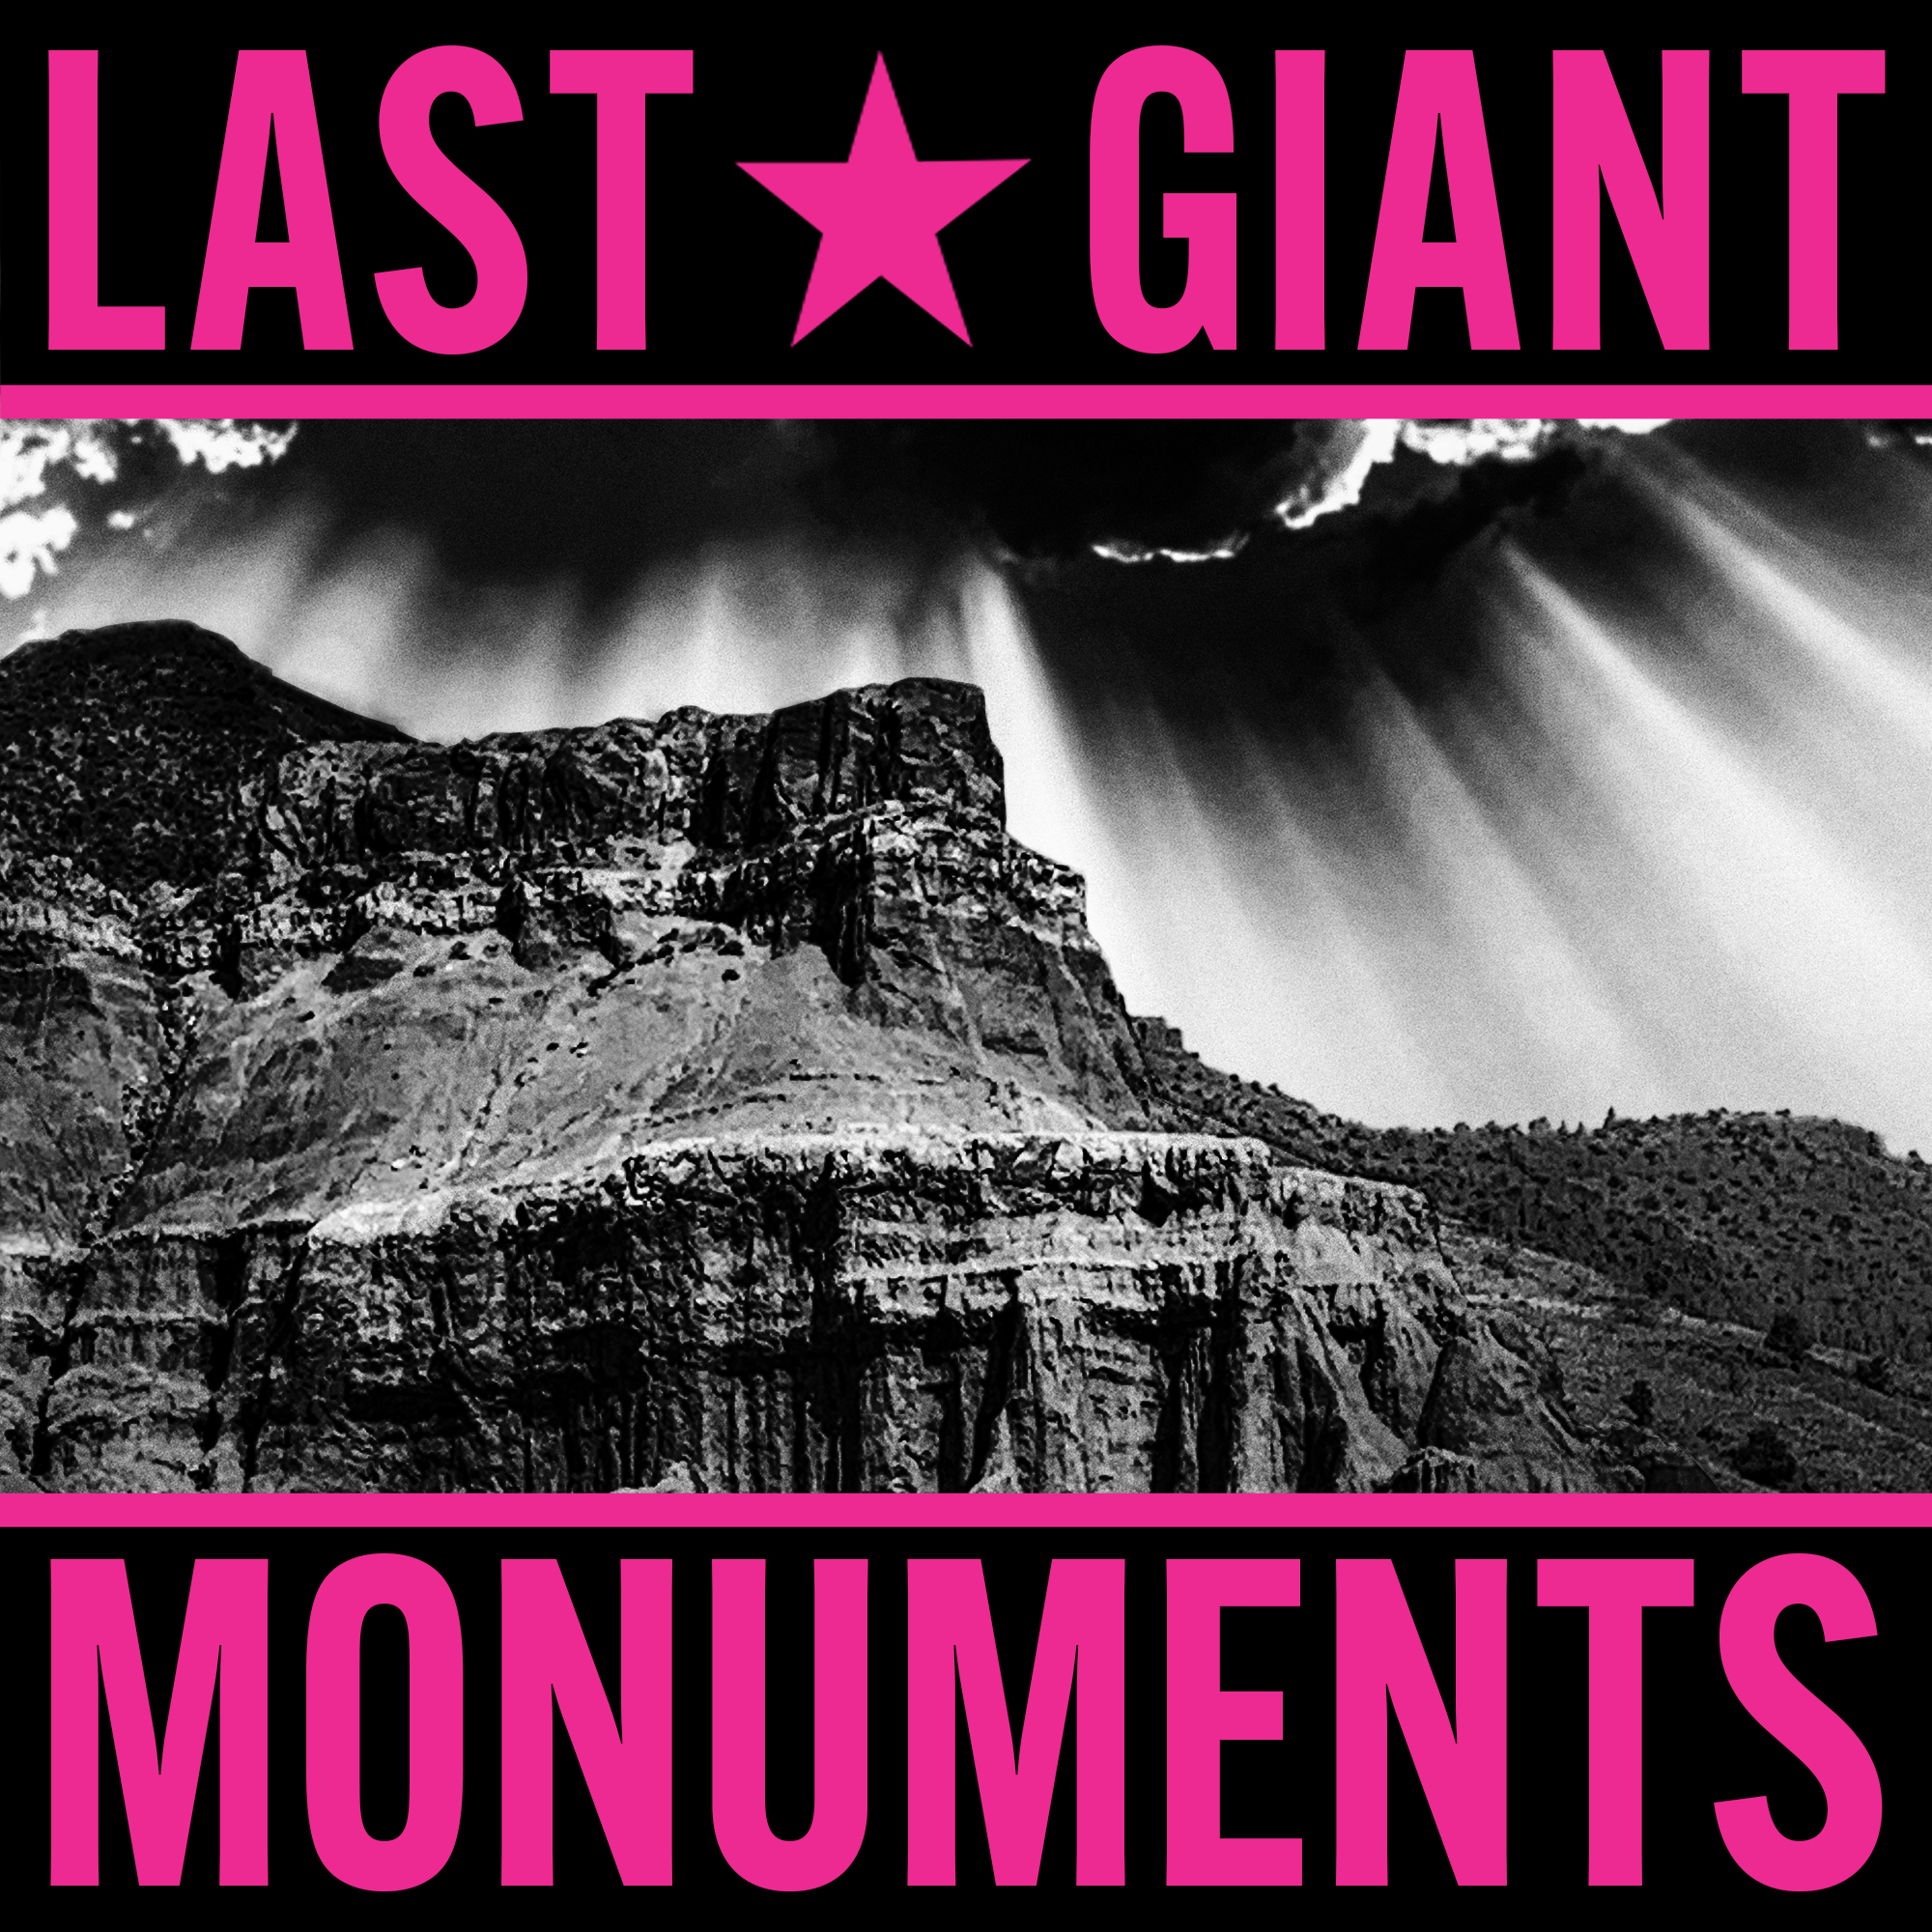 ALBUM REVIEW: Monuments by Last Giant